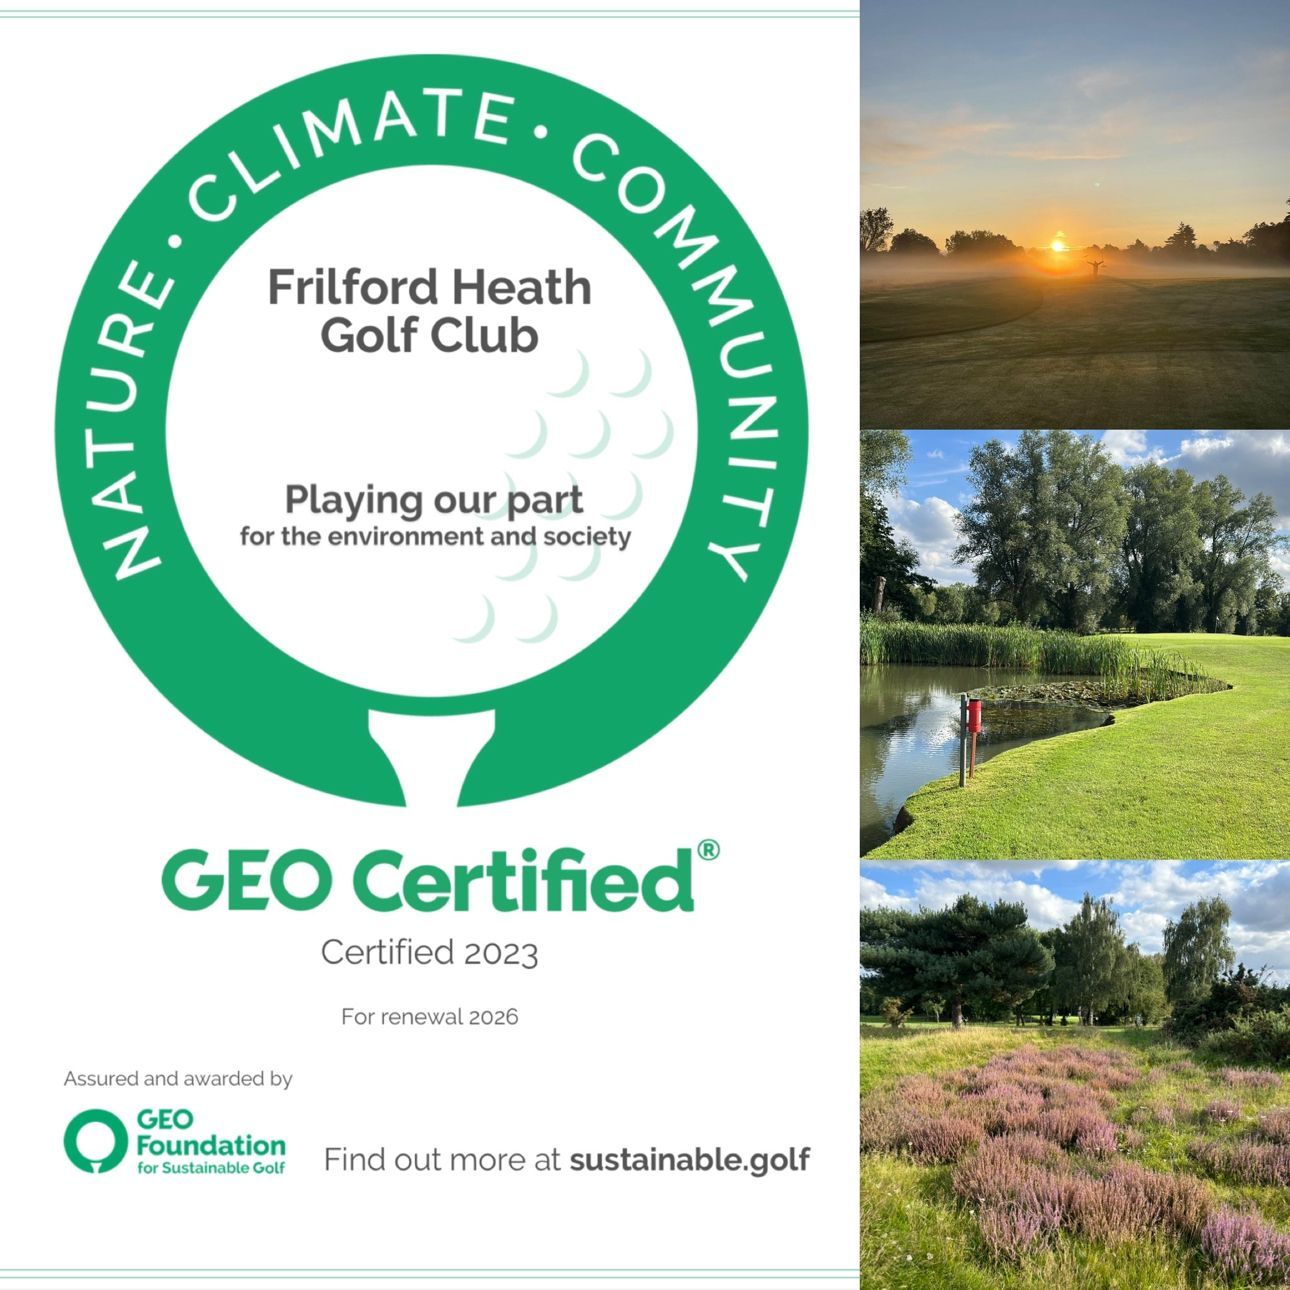 Frilford Heath Golf Club Recognised For Environmental Excellence With Prestigious GEO Certification Award